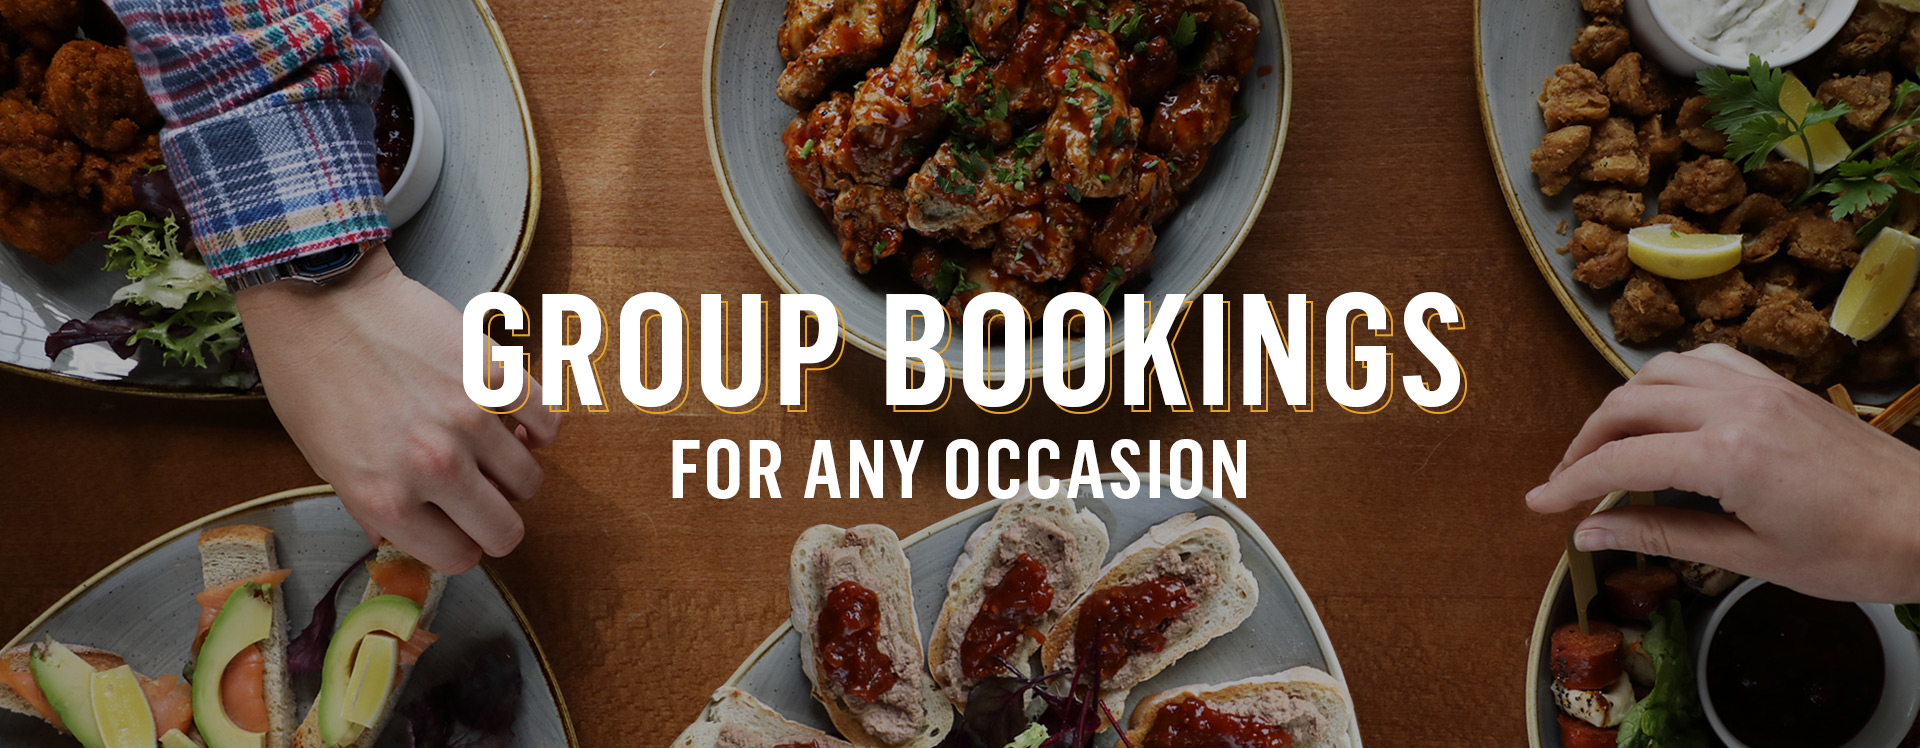 Group Bookings at The King's Head